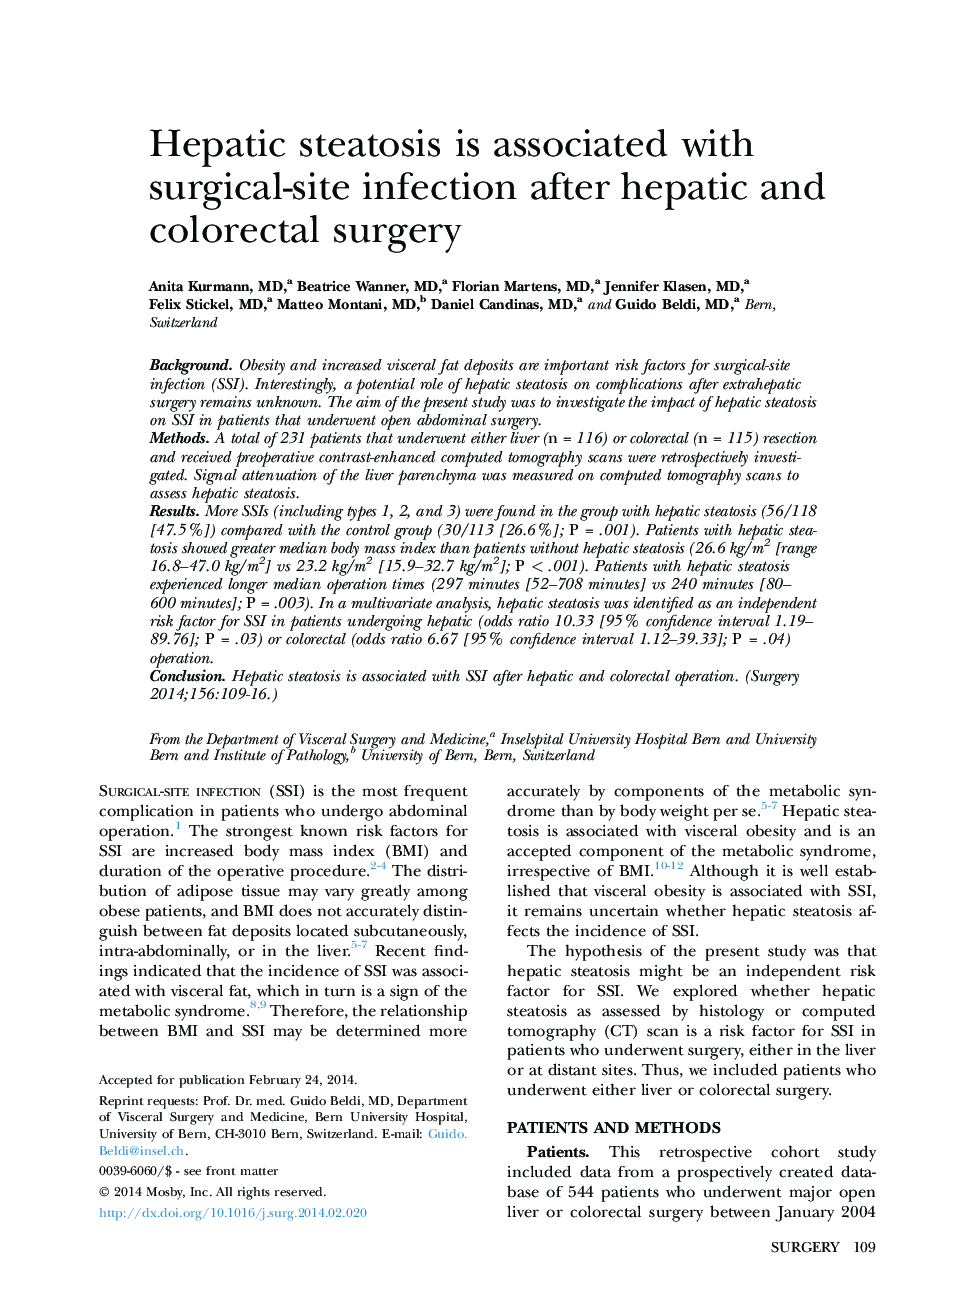 Hepatic steatosis is associated with surgical-site infection after hepatic and colorectal surgery